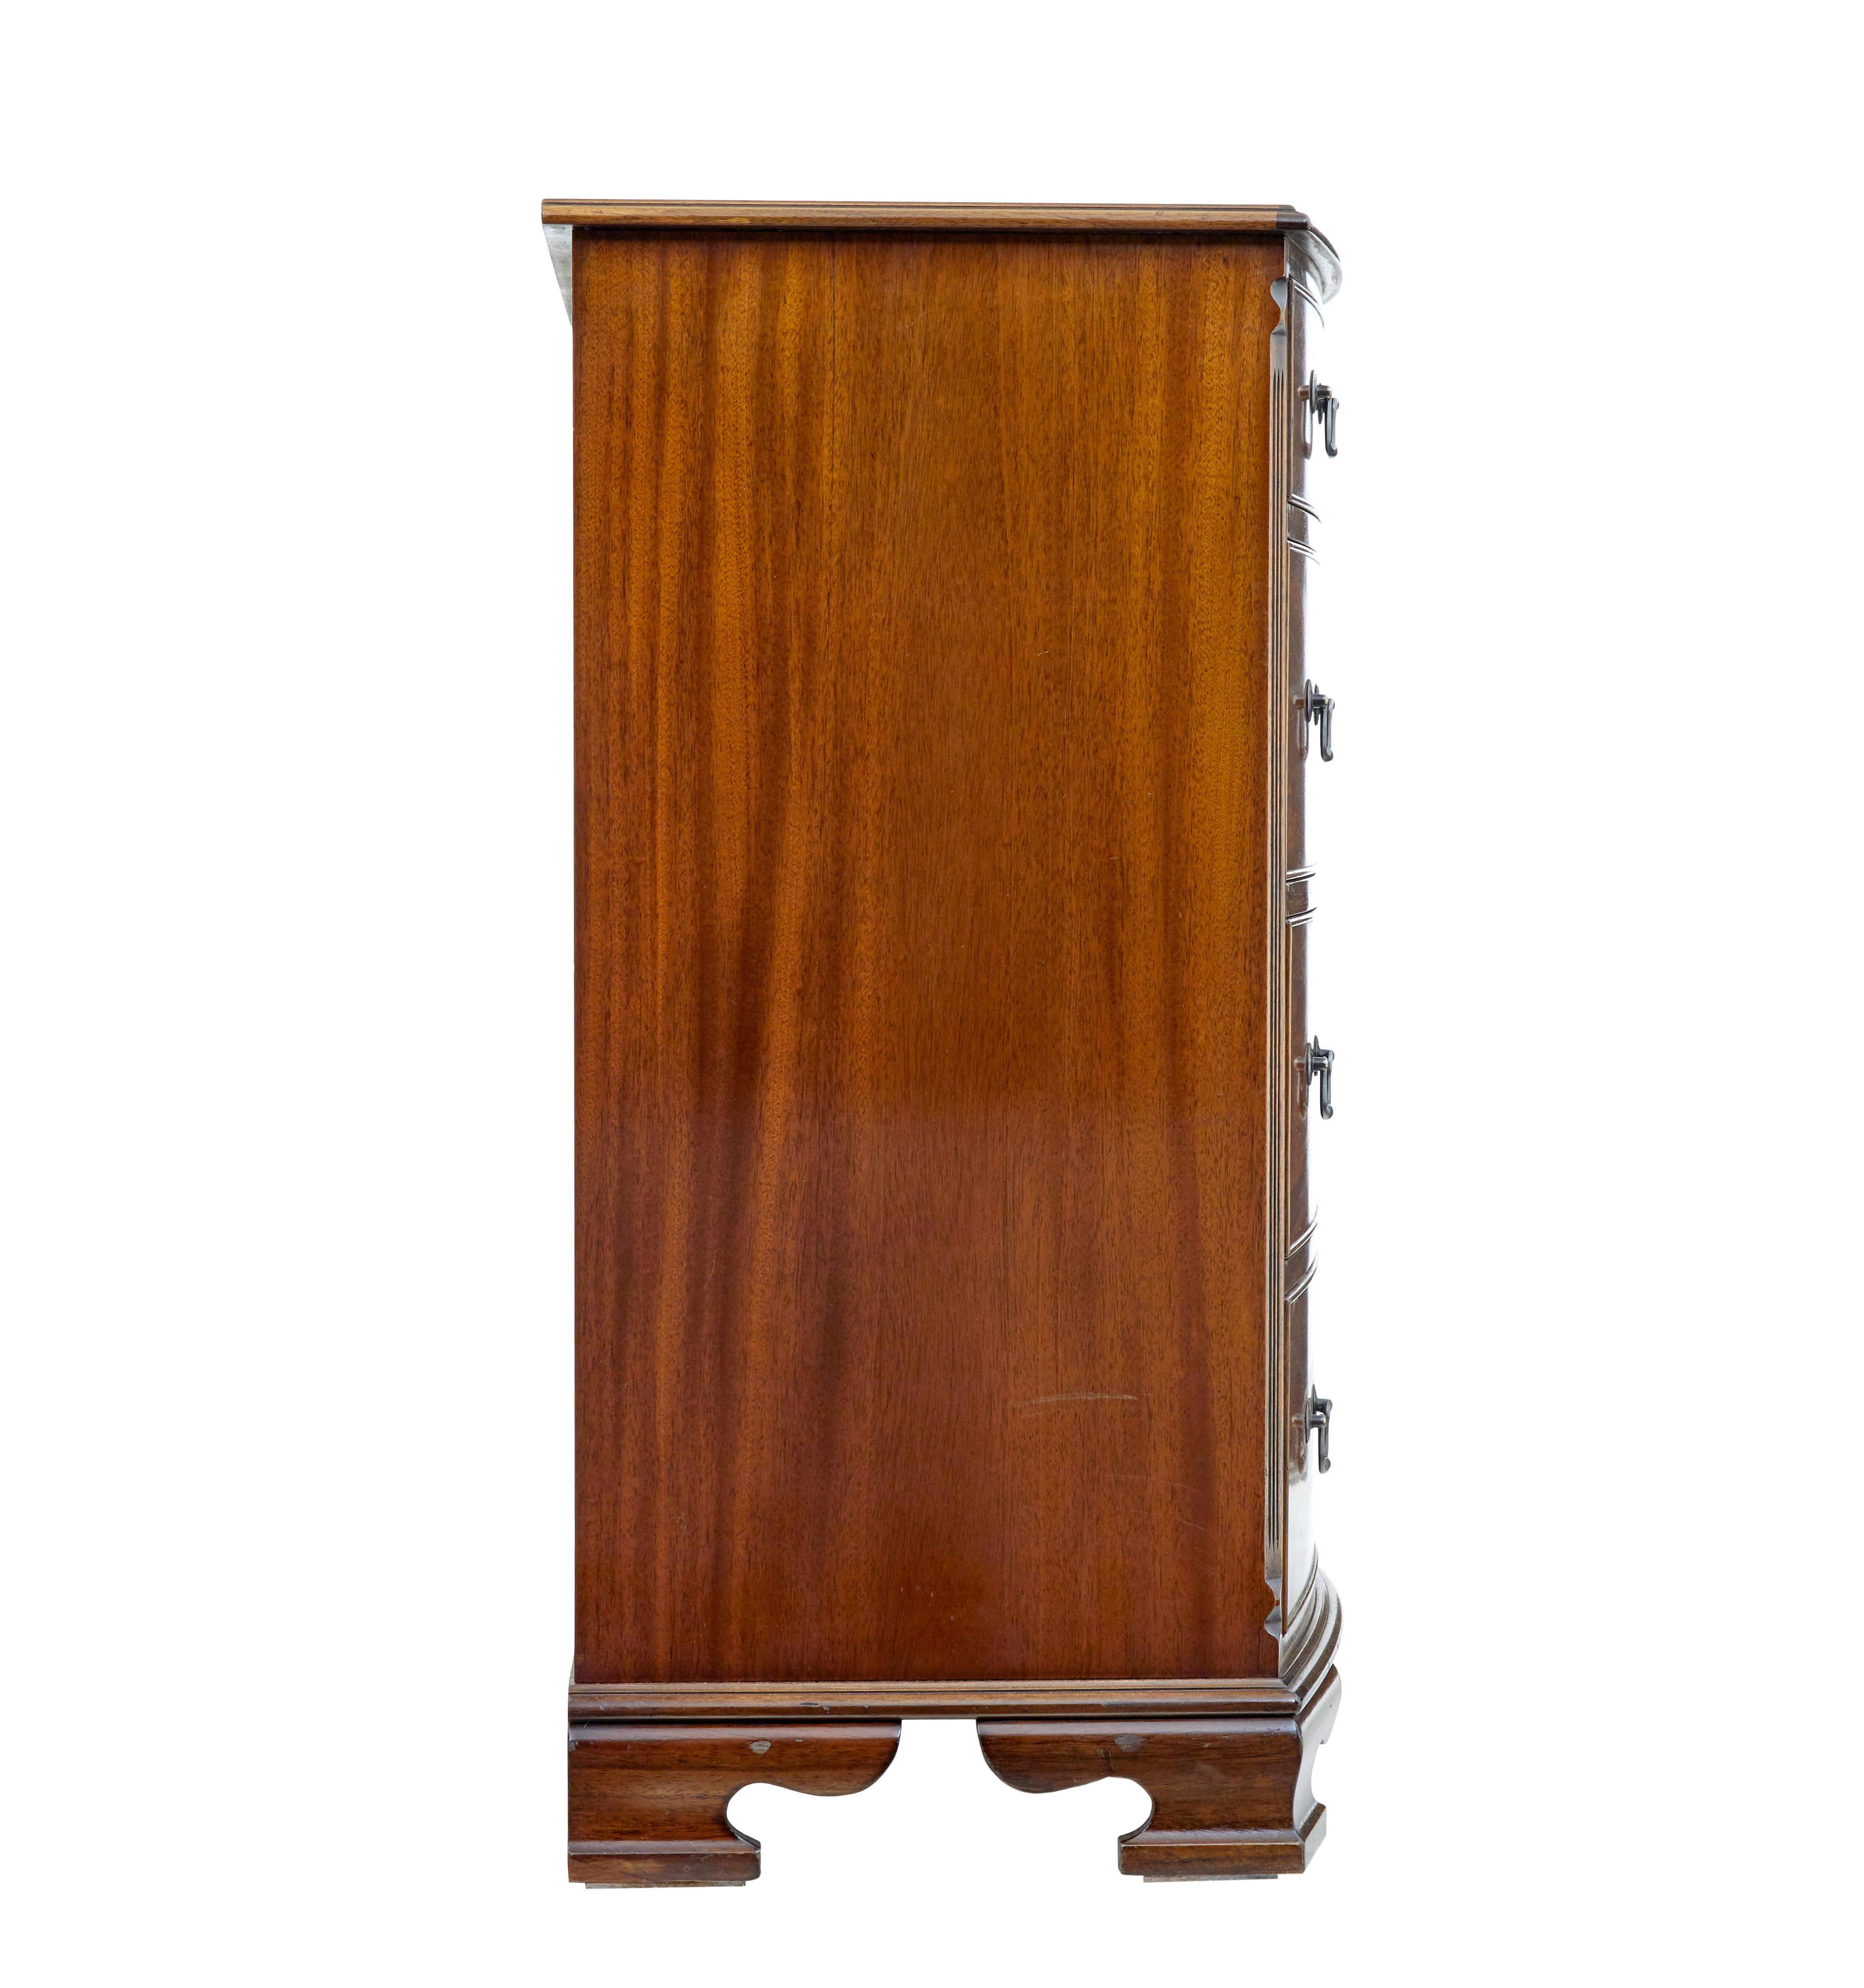 Hand-Crafted 20th century bowfront mahogany chest of drawers by Adam Richwood For Sale